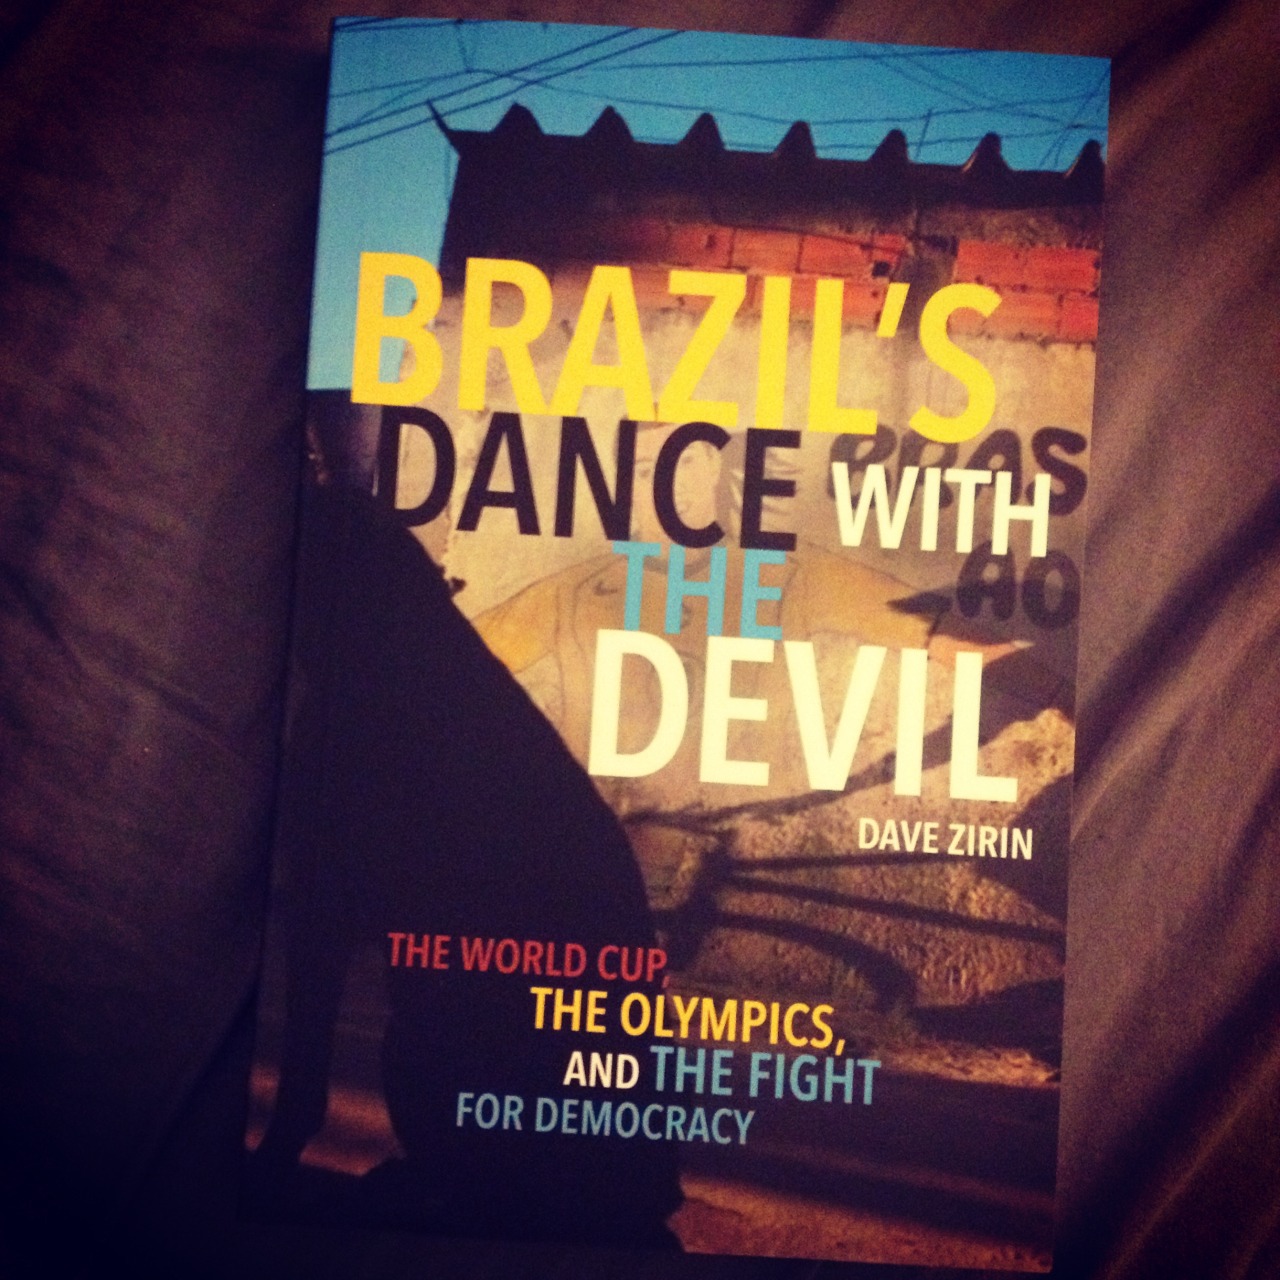 As We Watch Brazil’s Dance “ By Anthony Lopopolo
”
In the beginning of Dave Zirin’s book, Brazil’s Dance with the Devil, one of America’s pre-eminent political sports writers tells us that he simply had to write a book about Brazil – a country, said...